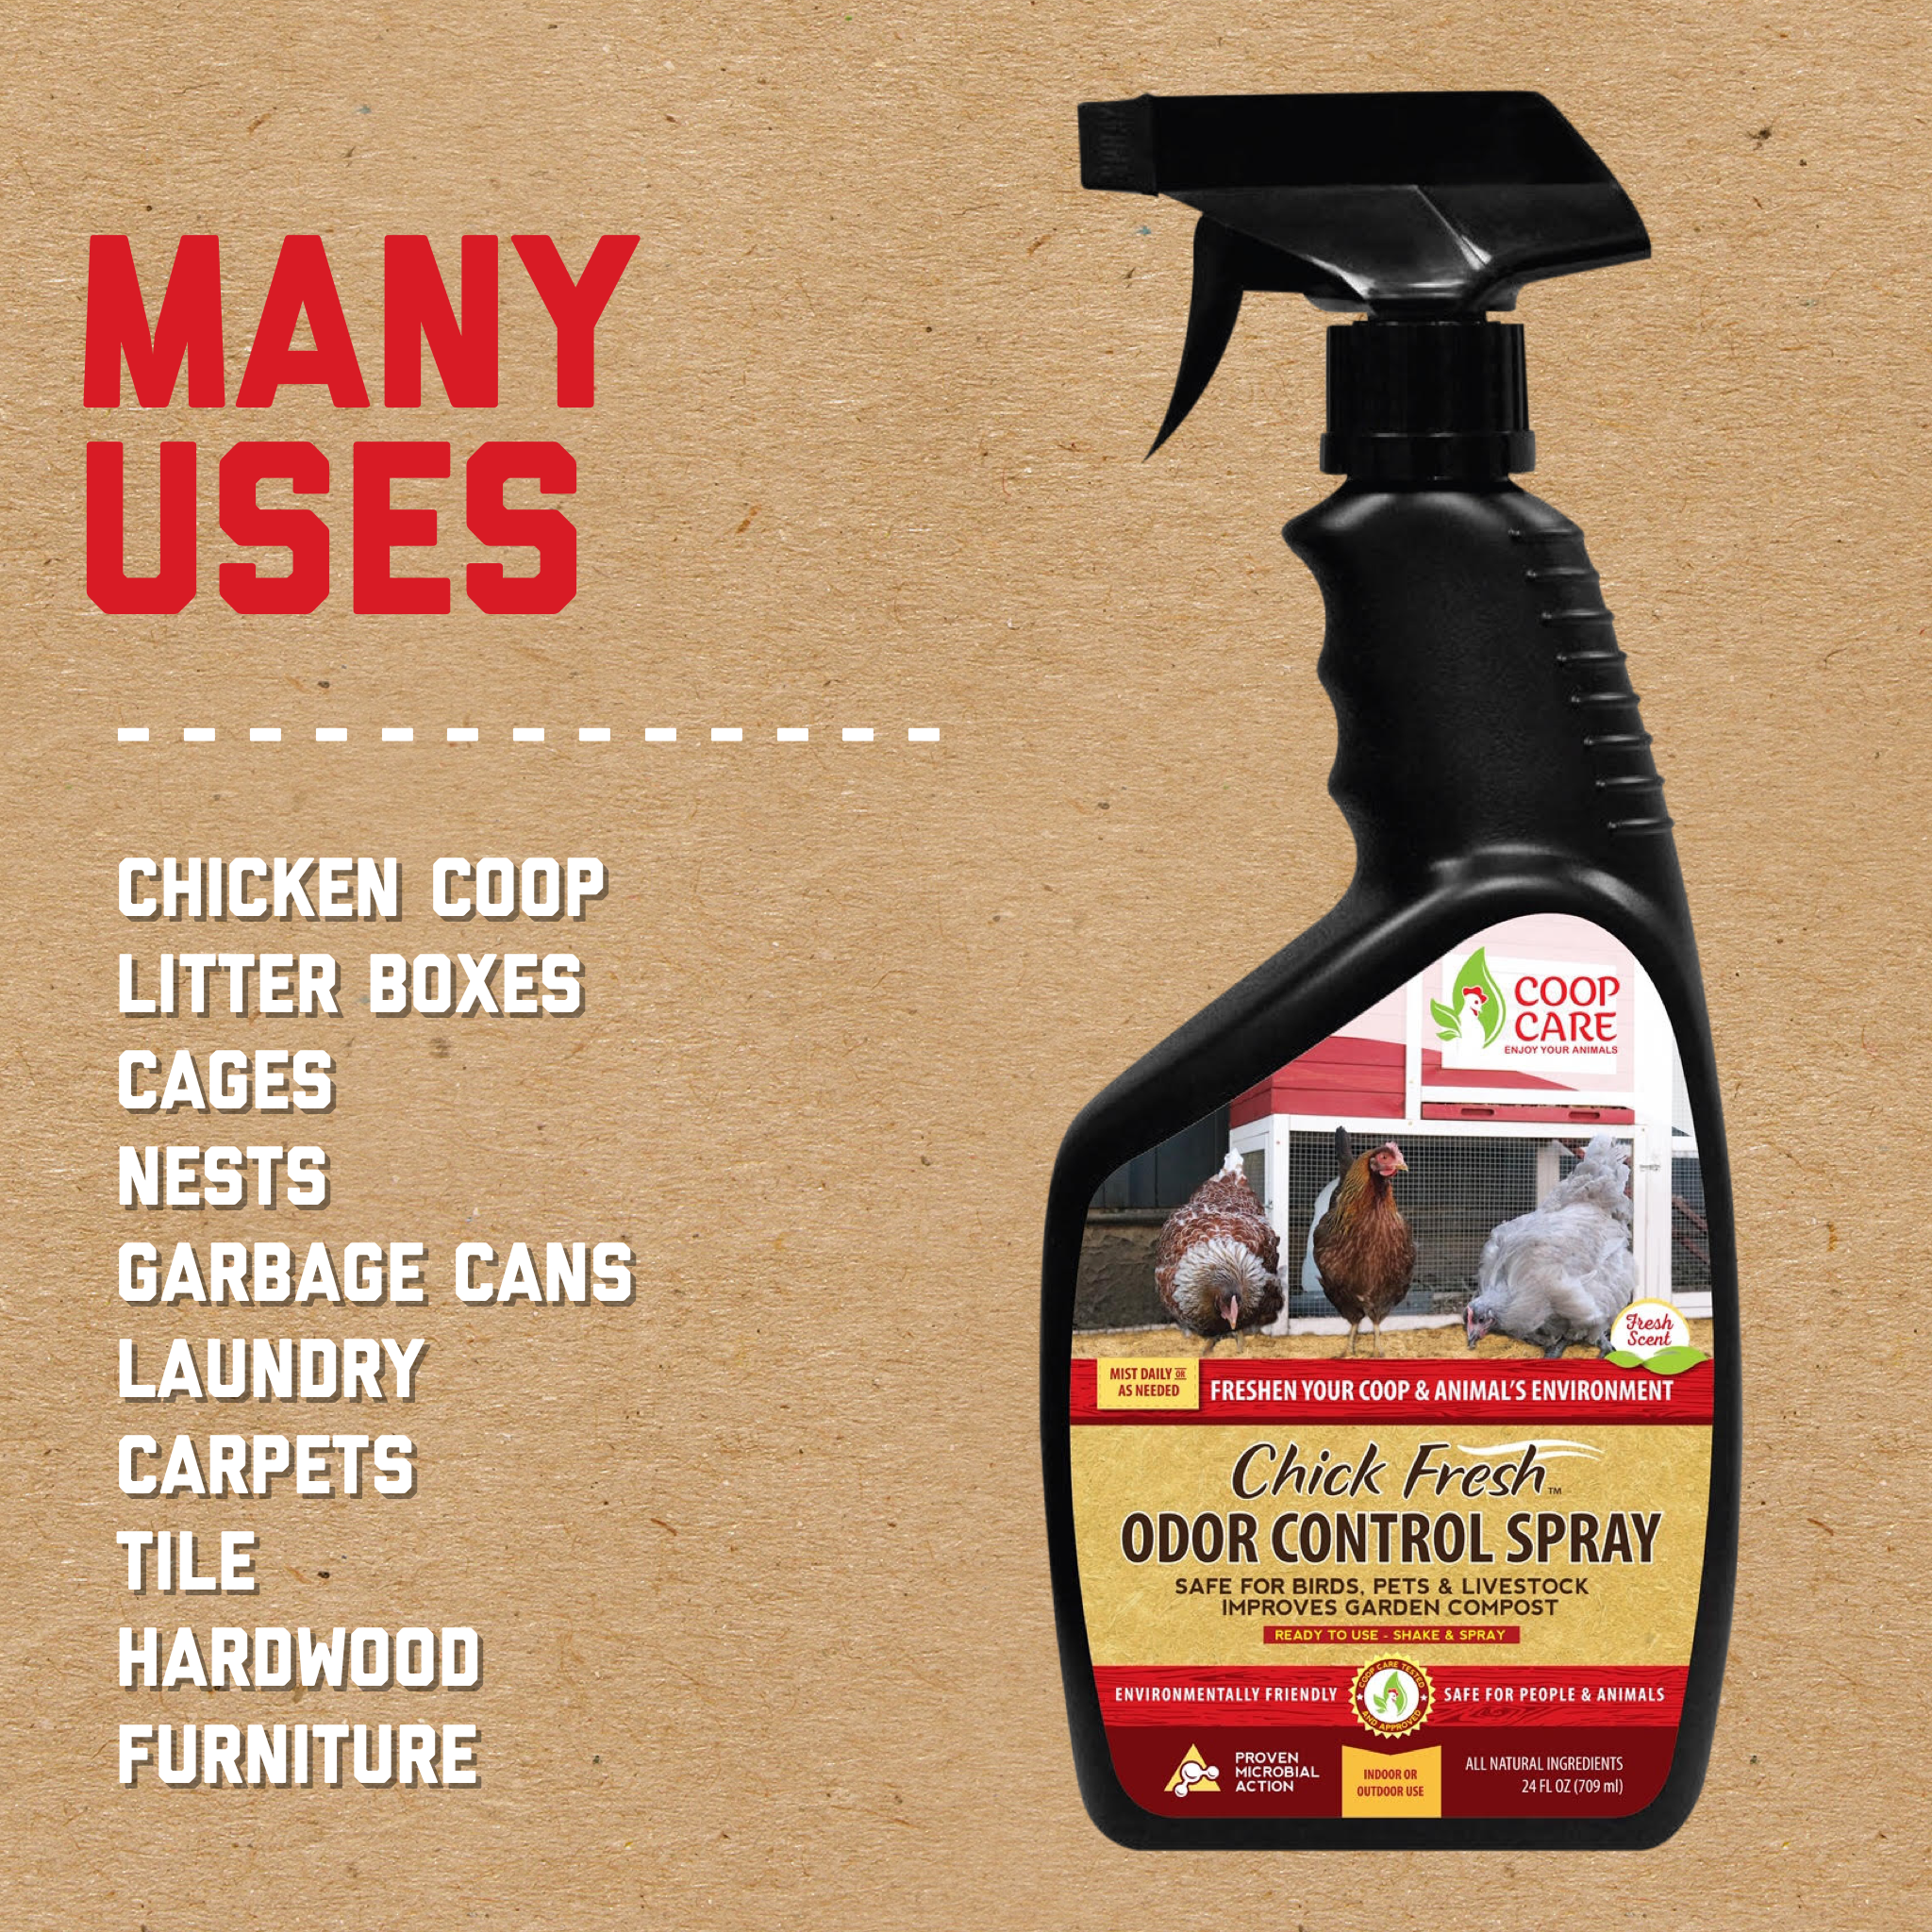 Chick Fresh Concentrate w/ FREE 4 oz Coop Cleaner Concentrate & empty 24 oz spray bottle - Remove odors, Mites and keep your coop clean